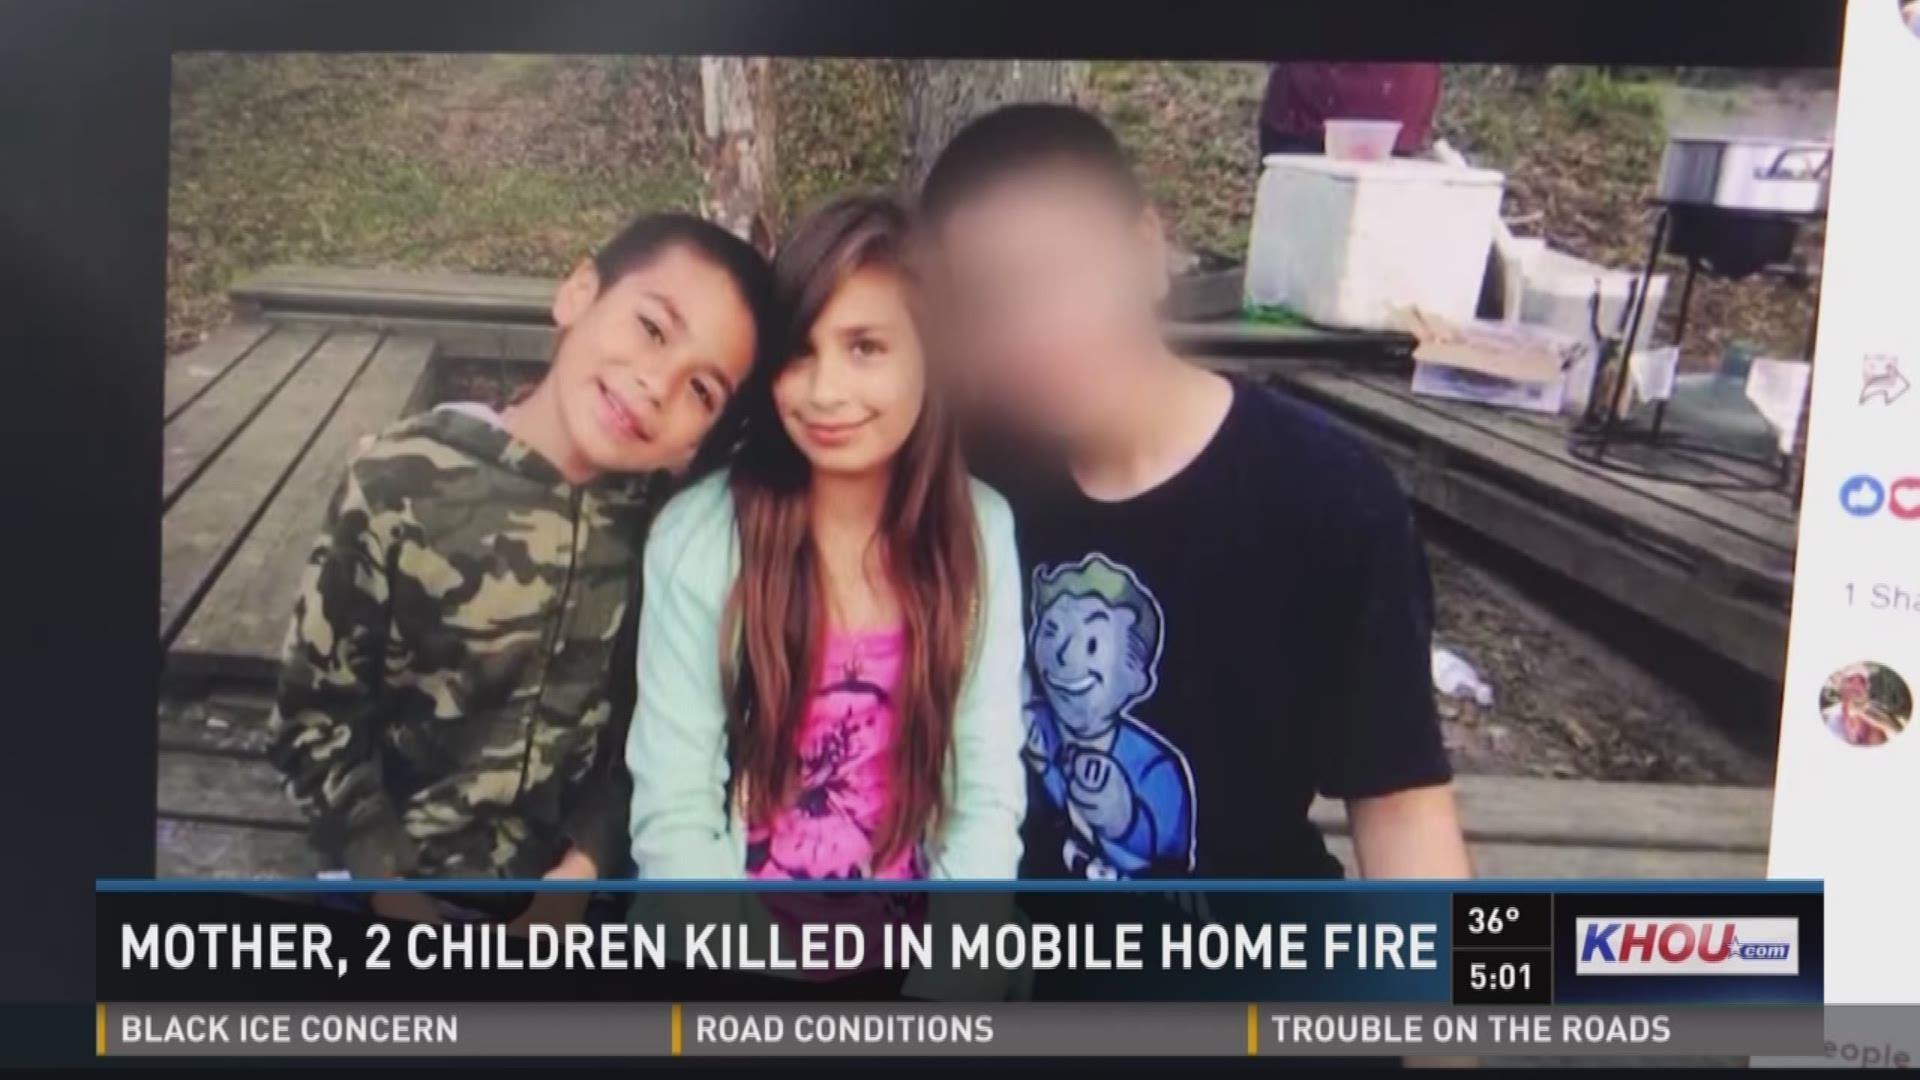 A mother and her two children were killed in a mobile home fire in Huffman early Wednesday morning.